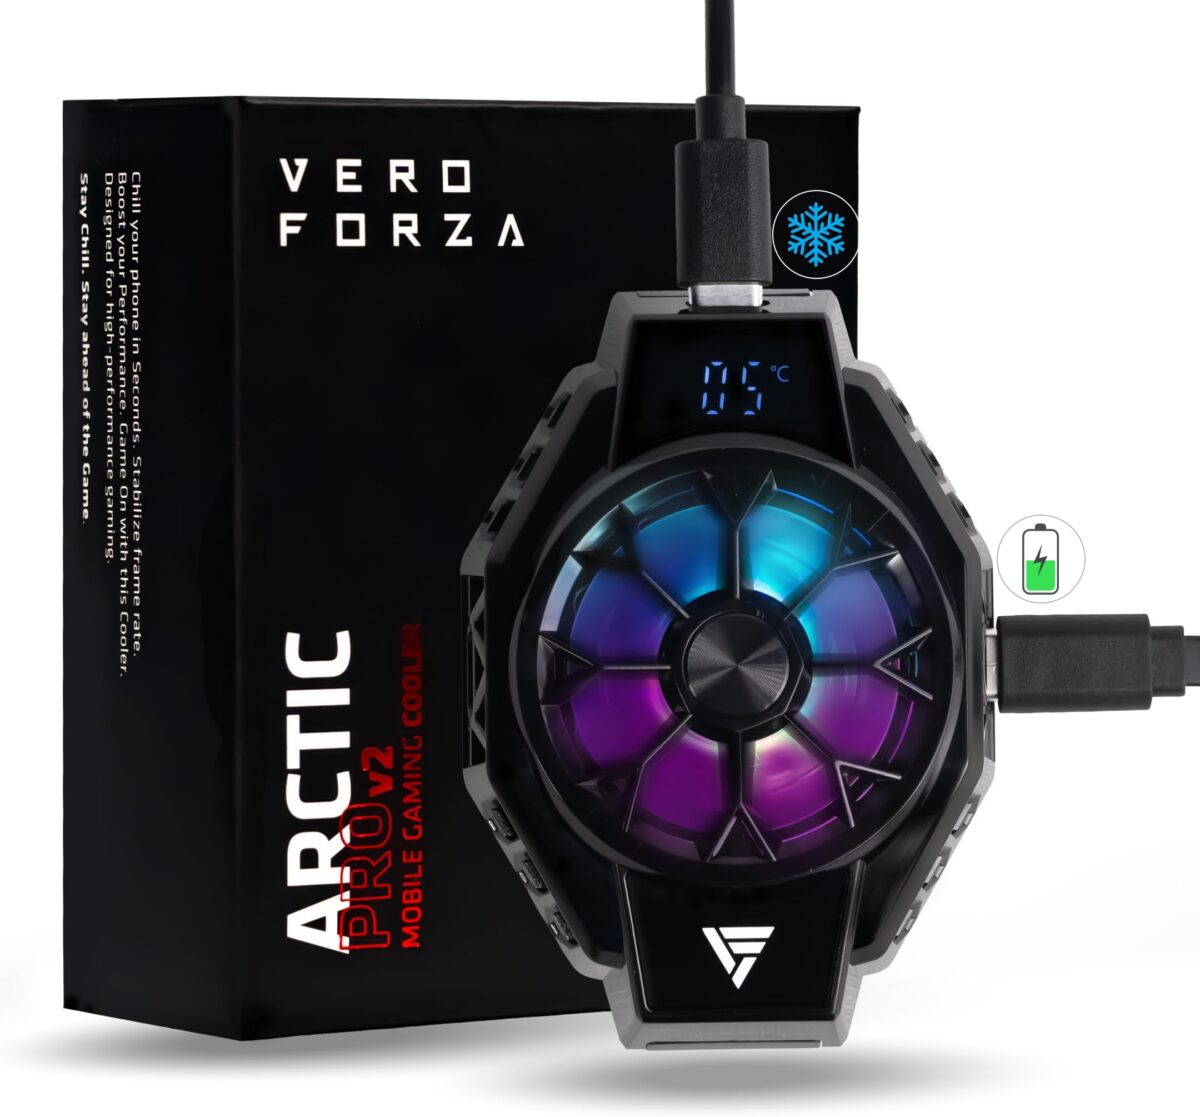 Vero Forza Arctic Pro V2 Mobile Cooler for Gaming, Phone Cooler, for Bgmi, Pubg, Cod, Freefire & Fortnite (iPhone/Android) (Black) (Arcticpro_V2)